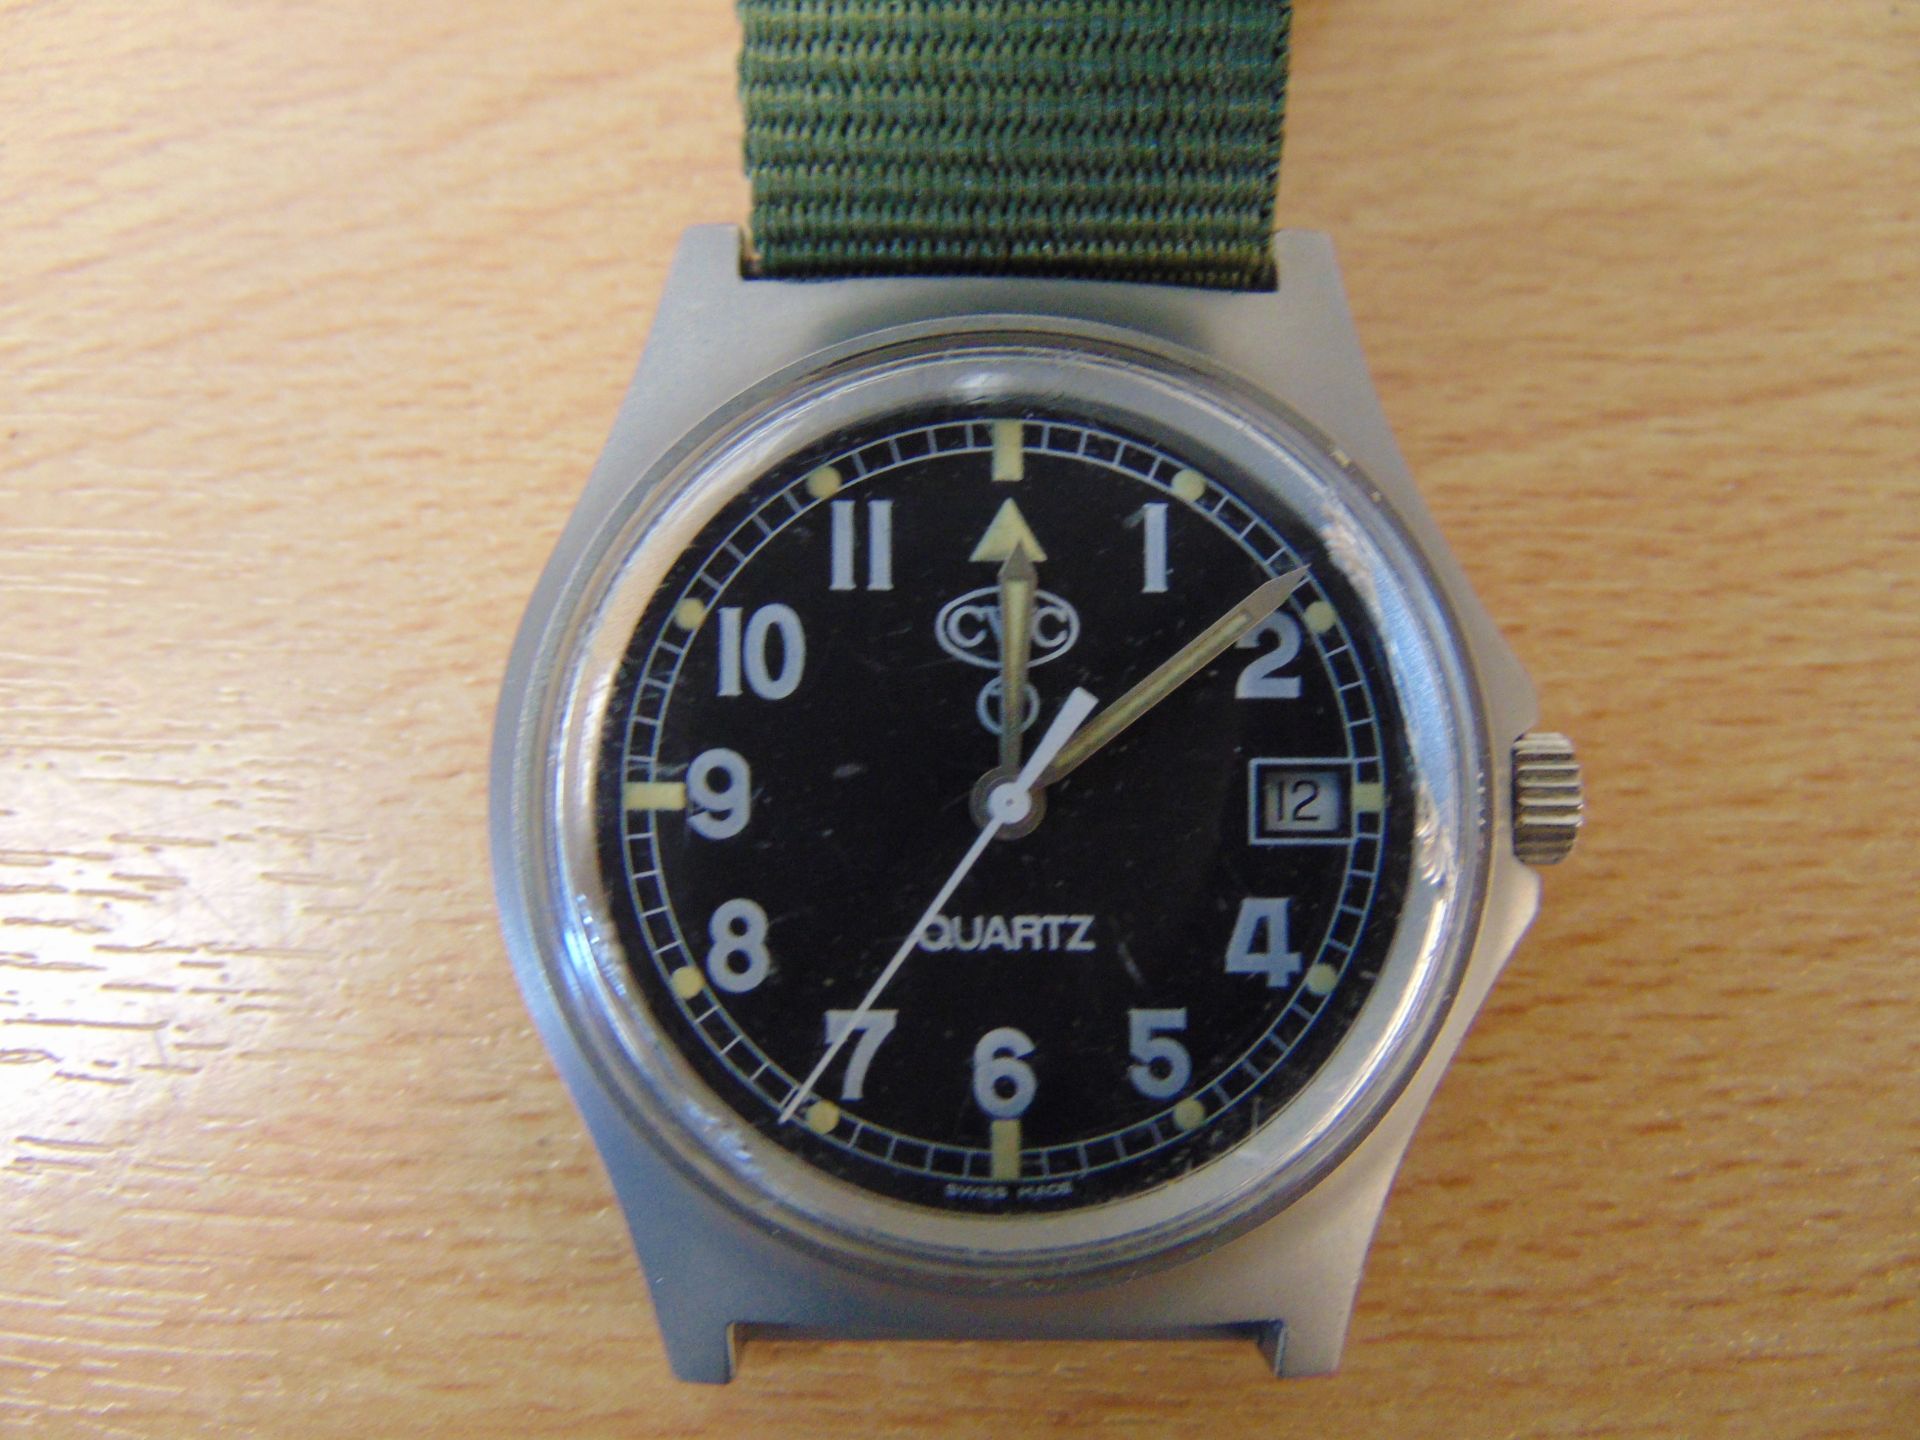 Very Rare CWC British Service Watch Serial No 0033 with Date Adjust Nato Marks Date 1996 - Image 2 of 4